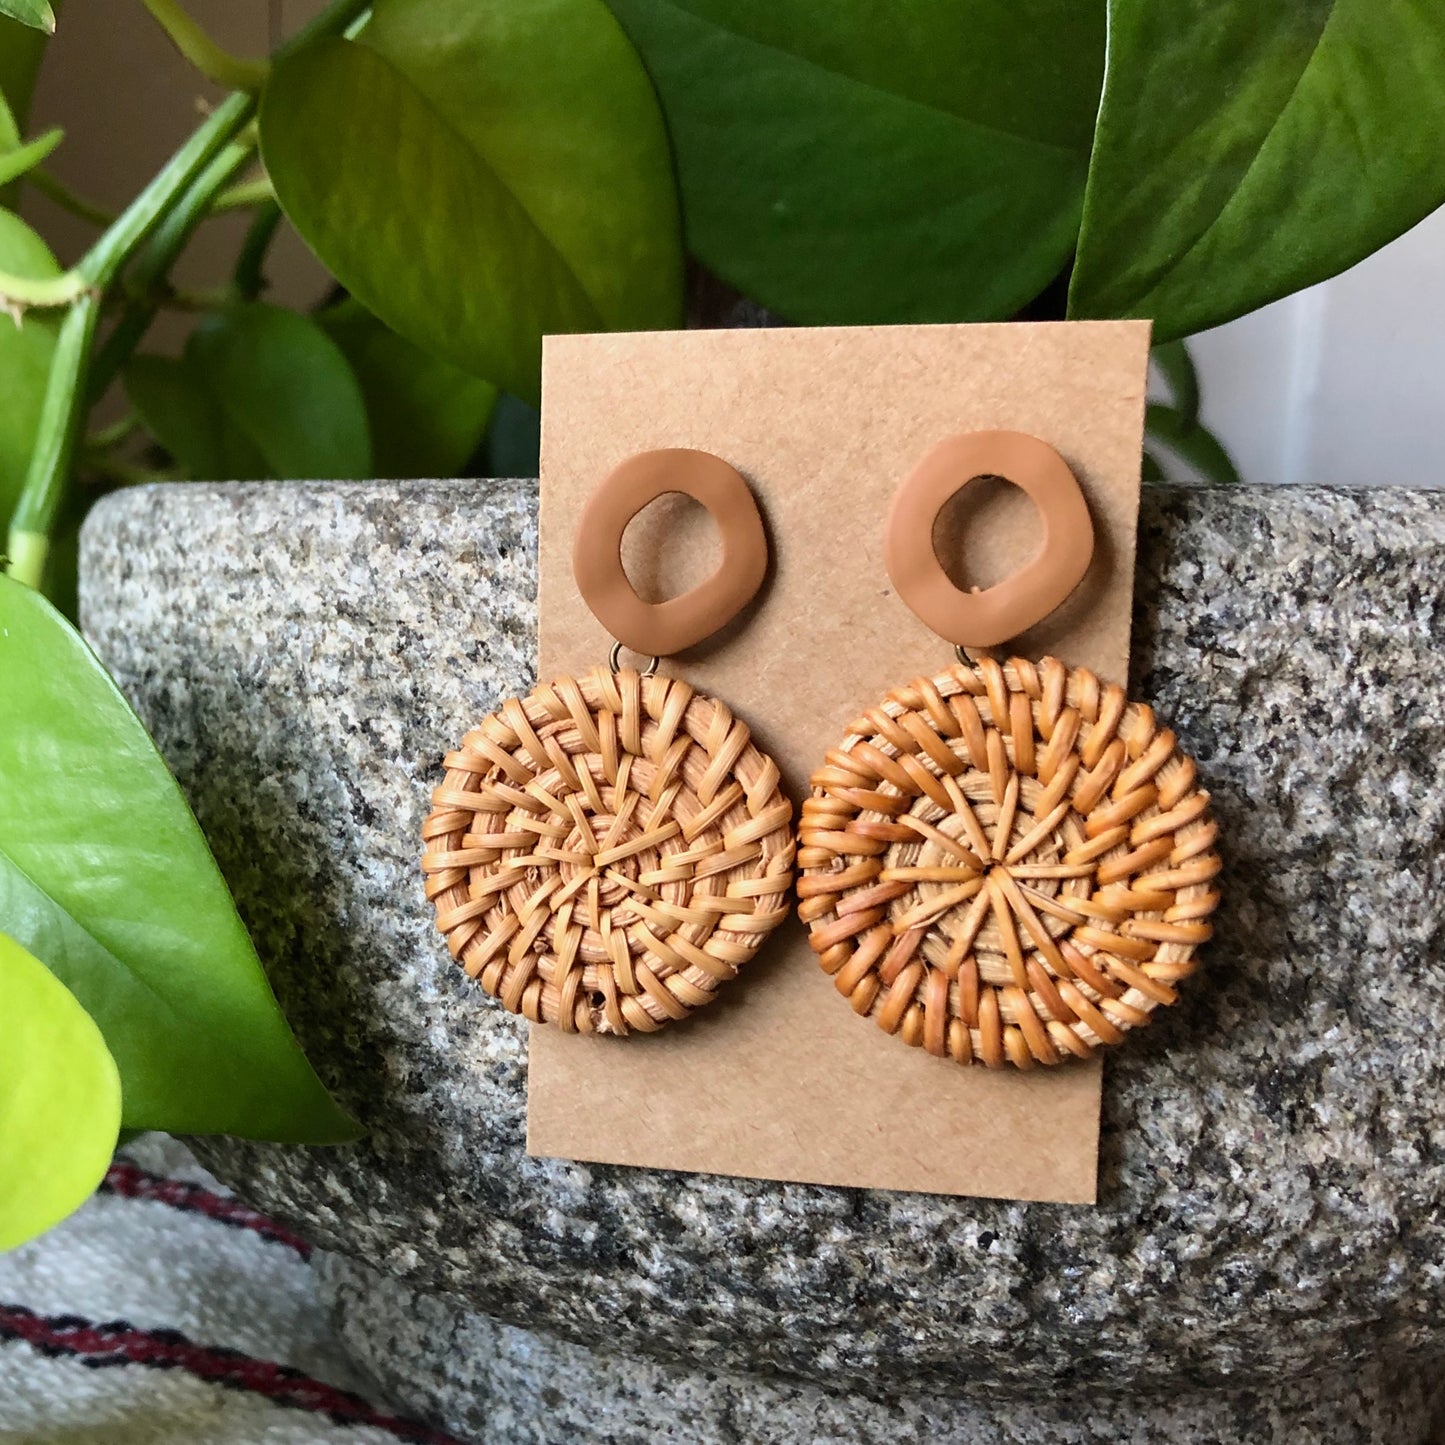 Handmade, natural, and lightweight statement earrings. These rattan drop earrings are perfect for a special occasion or casual everyday wear. Available in a variety of accent colors to pair with any style!